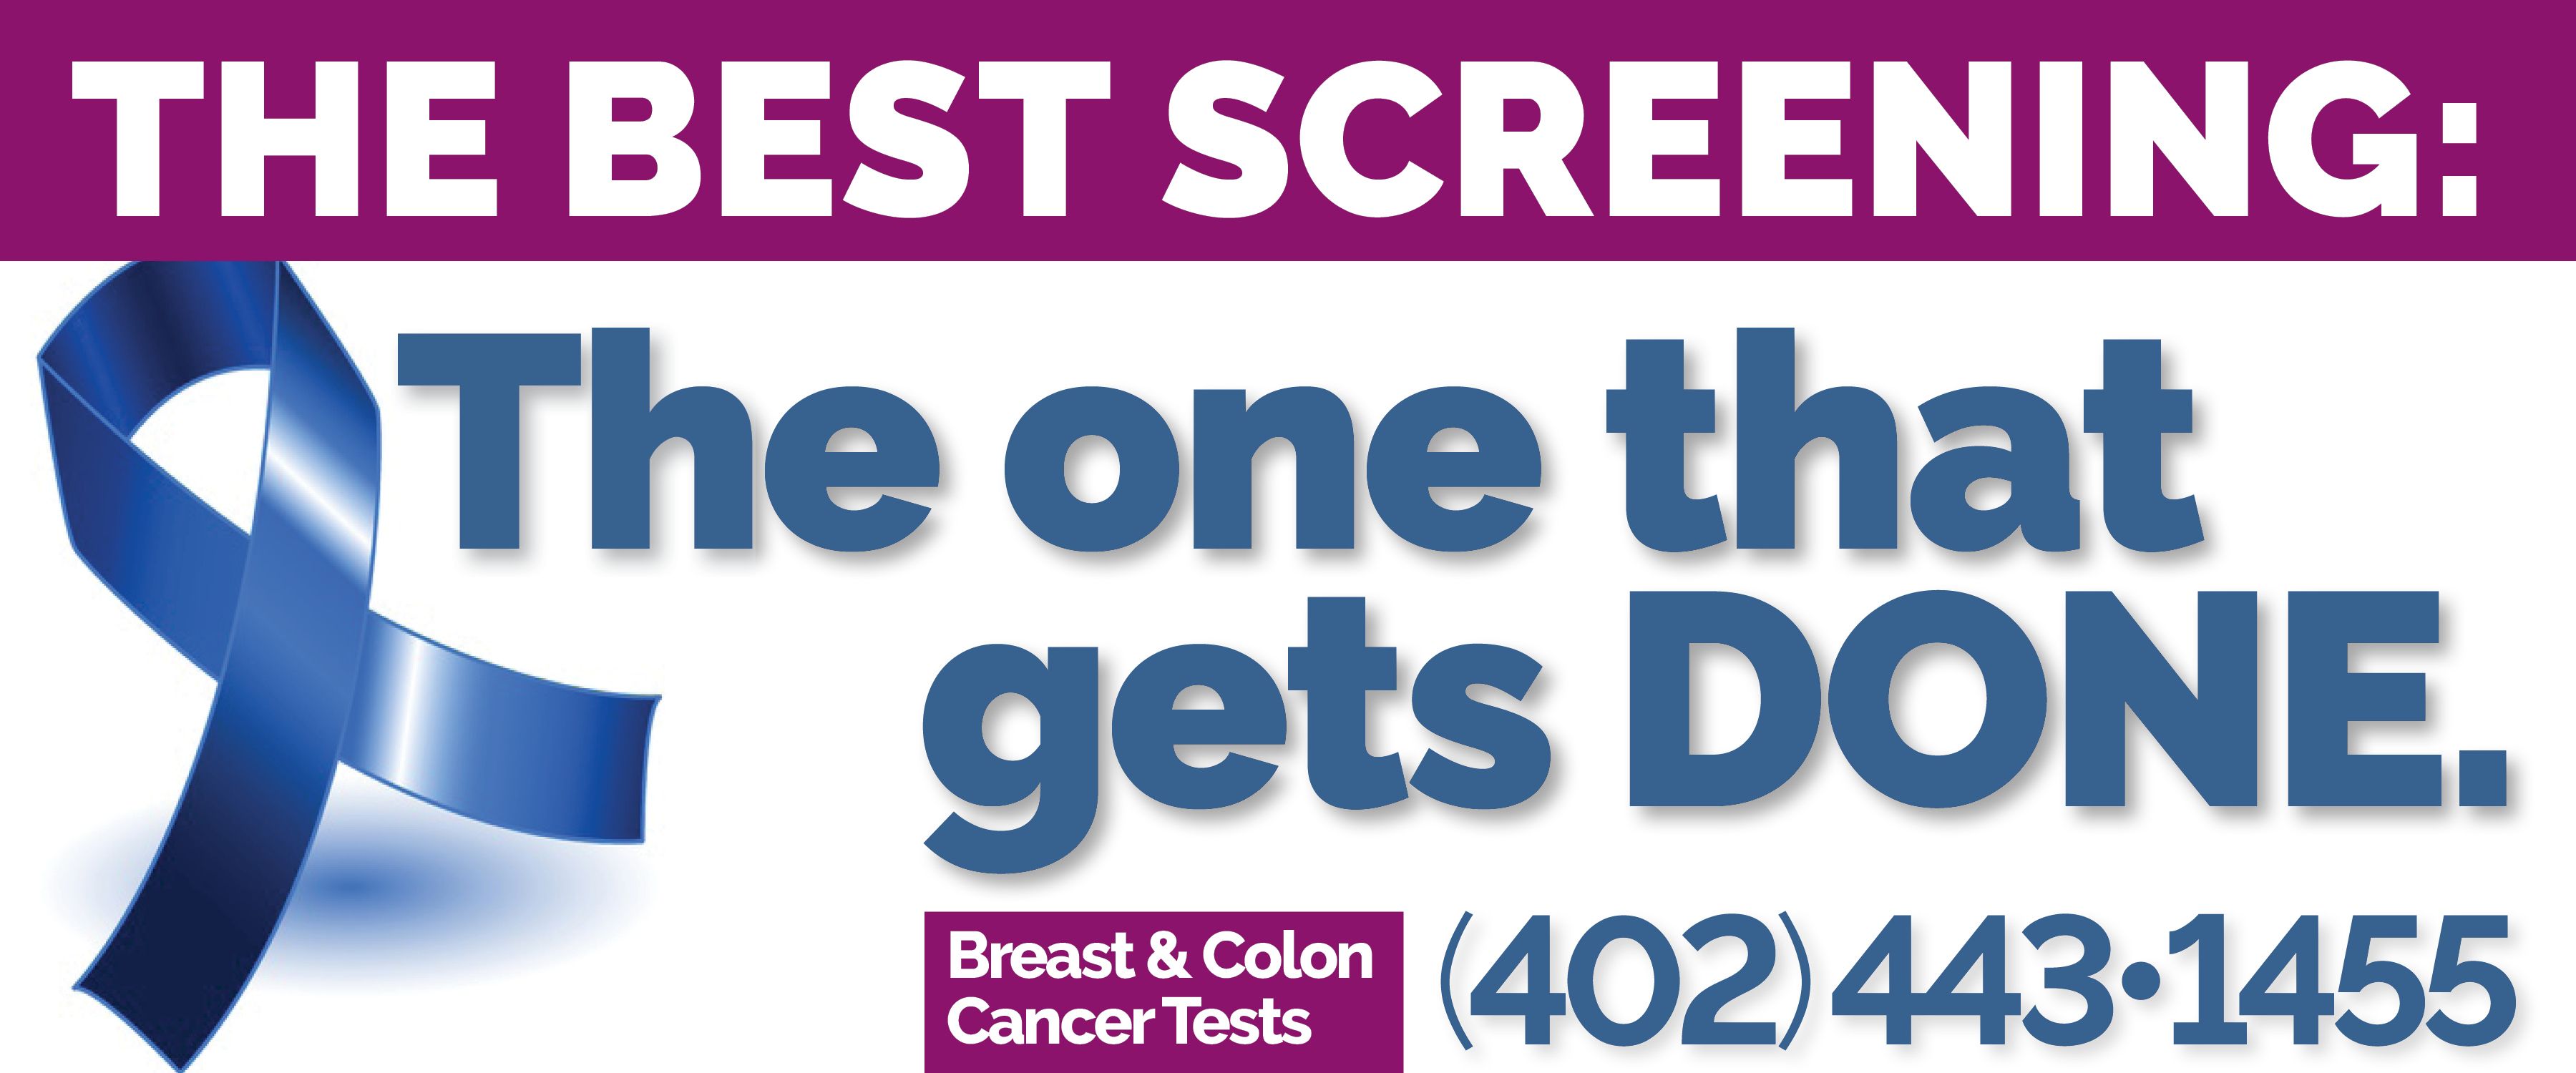 Should Colon Cancer Screening Start at 45, not 50?